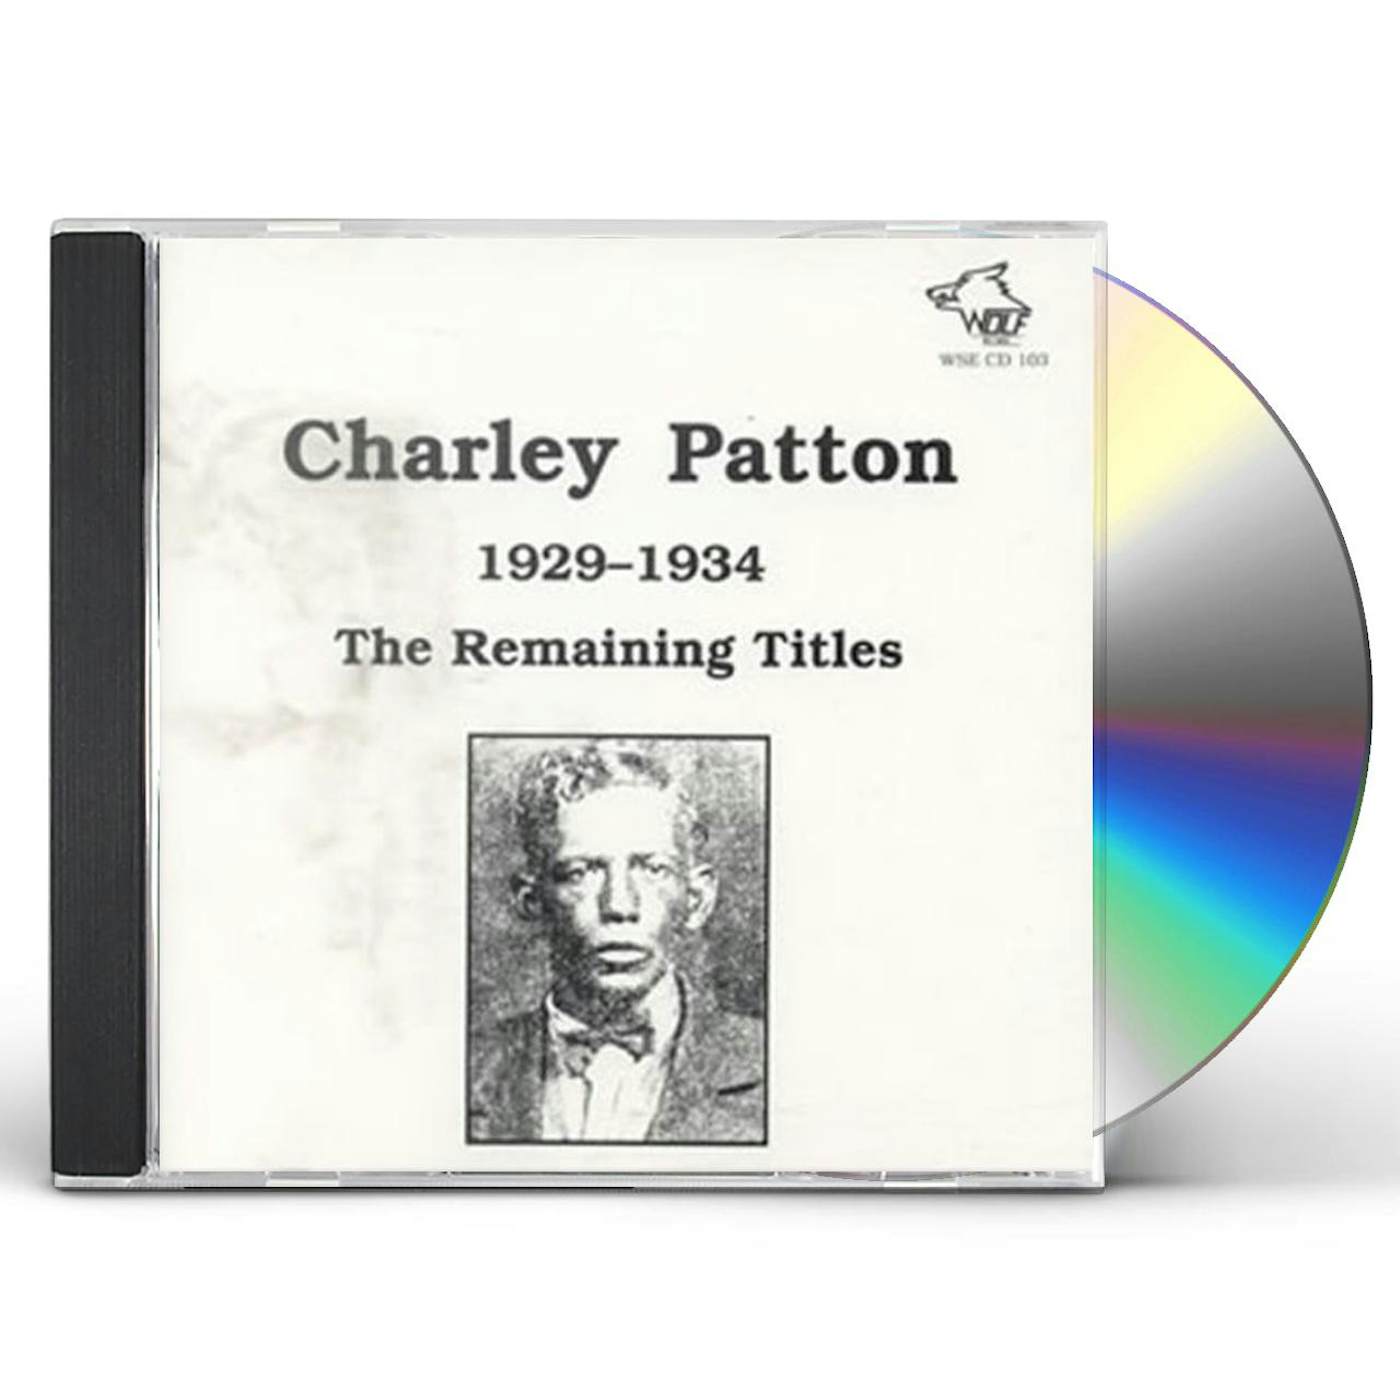 Charley Patton 1929-1934 REMAINING TITLES CD